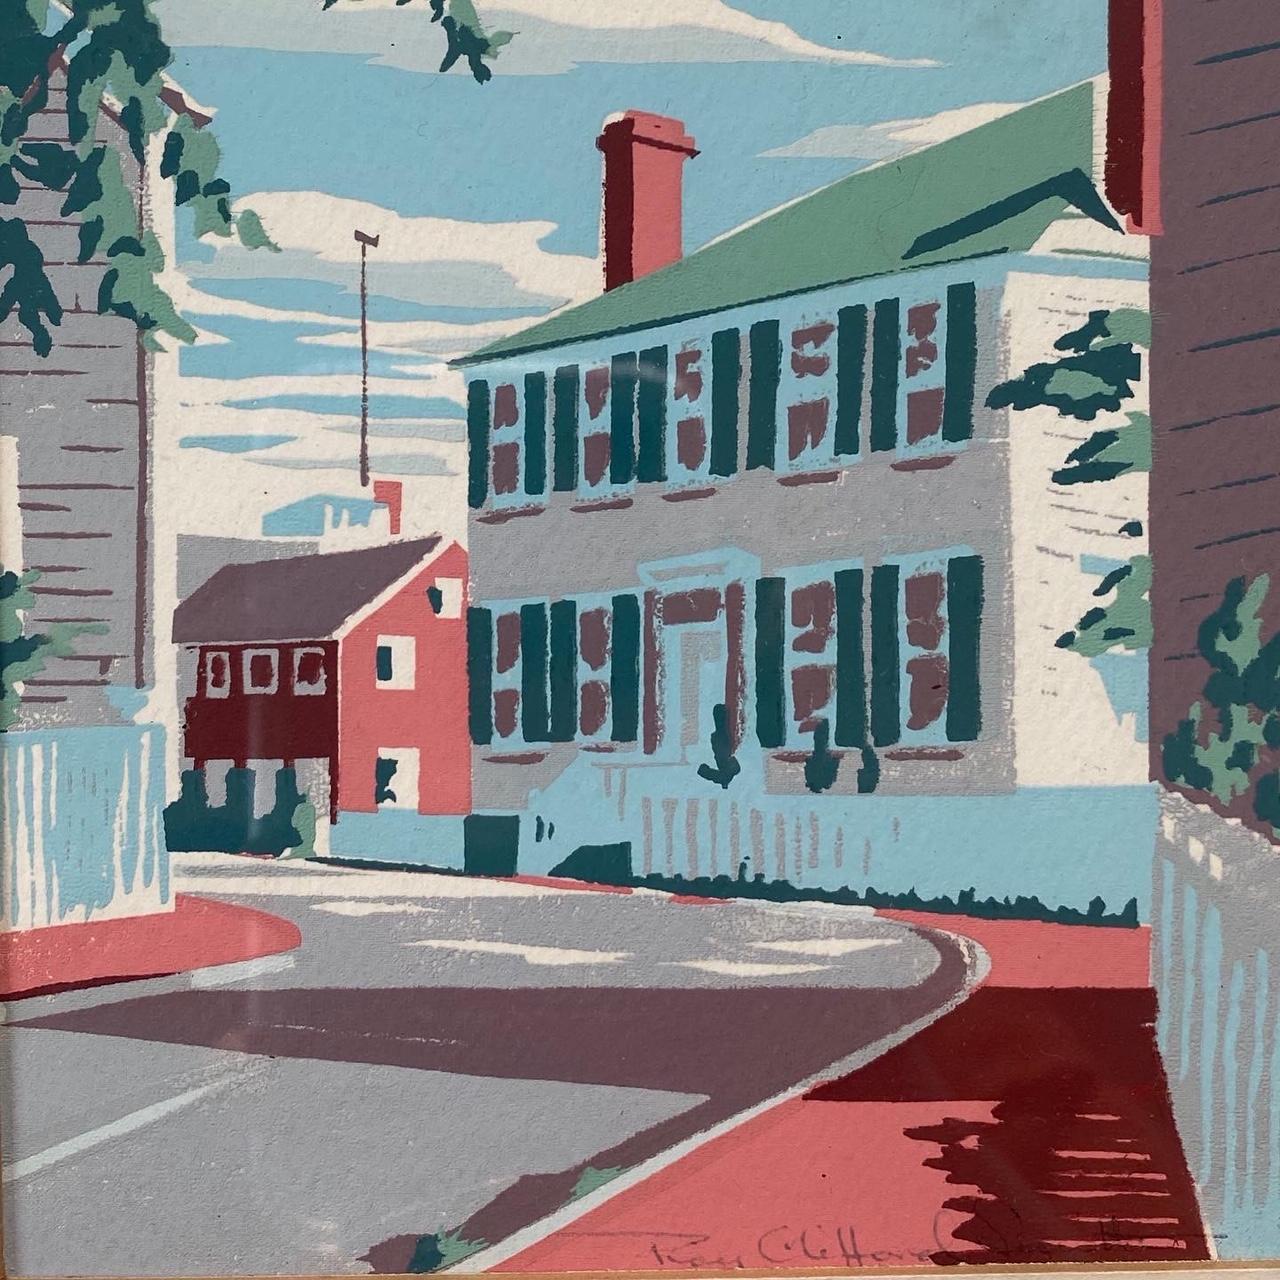 Vintage Nantucket Serigraph of Union Street by Roy Clifford Smith, circa 1920s-1940s, depicting the historic whaling Captain Ayer's house along the bend of Union Street, across from Stone Alley and what is now The Union Street Inn, beneath the